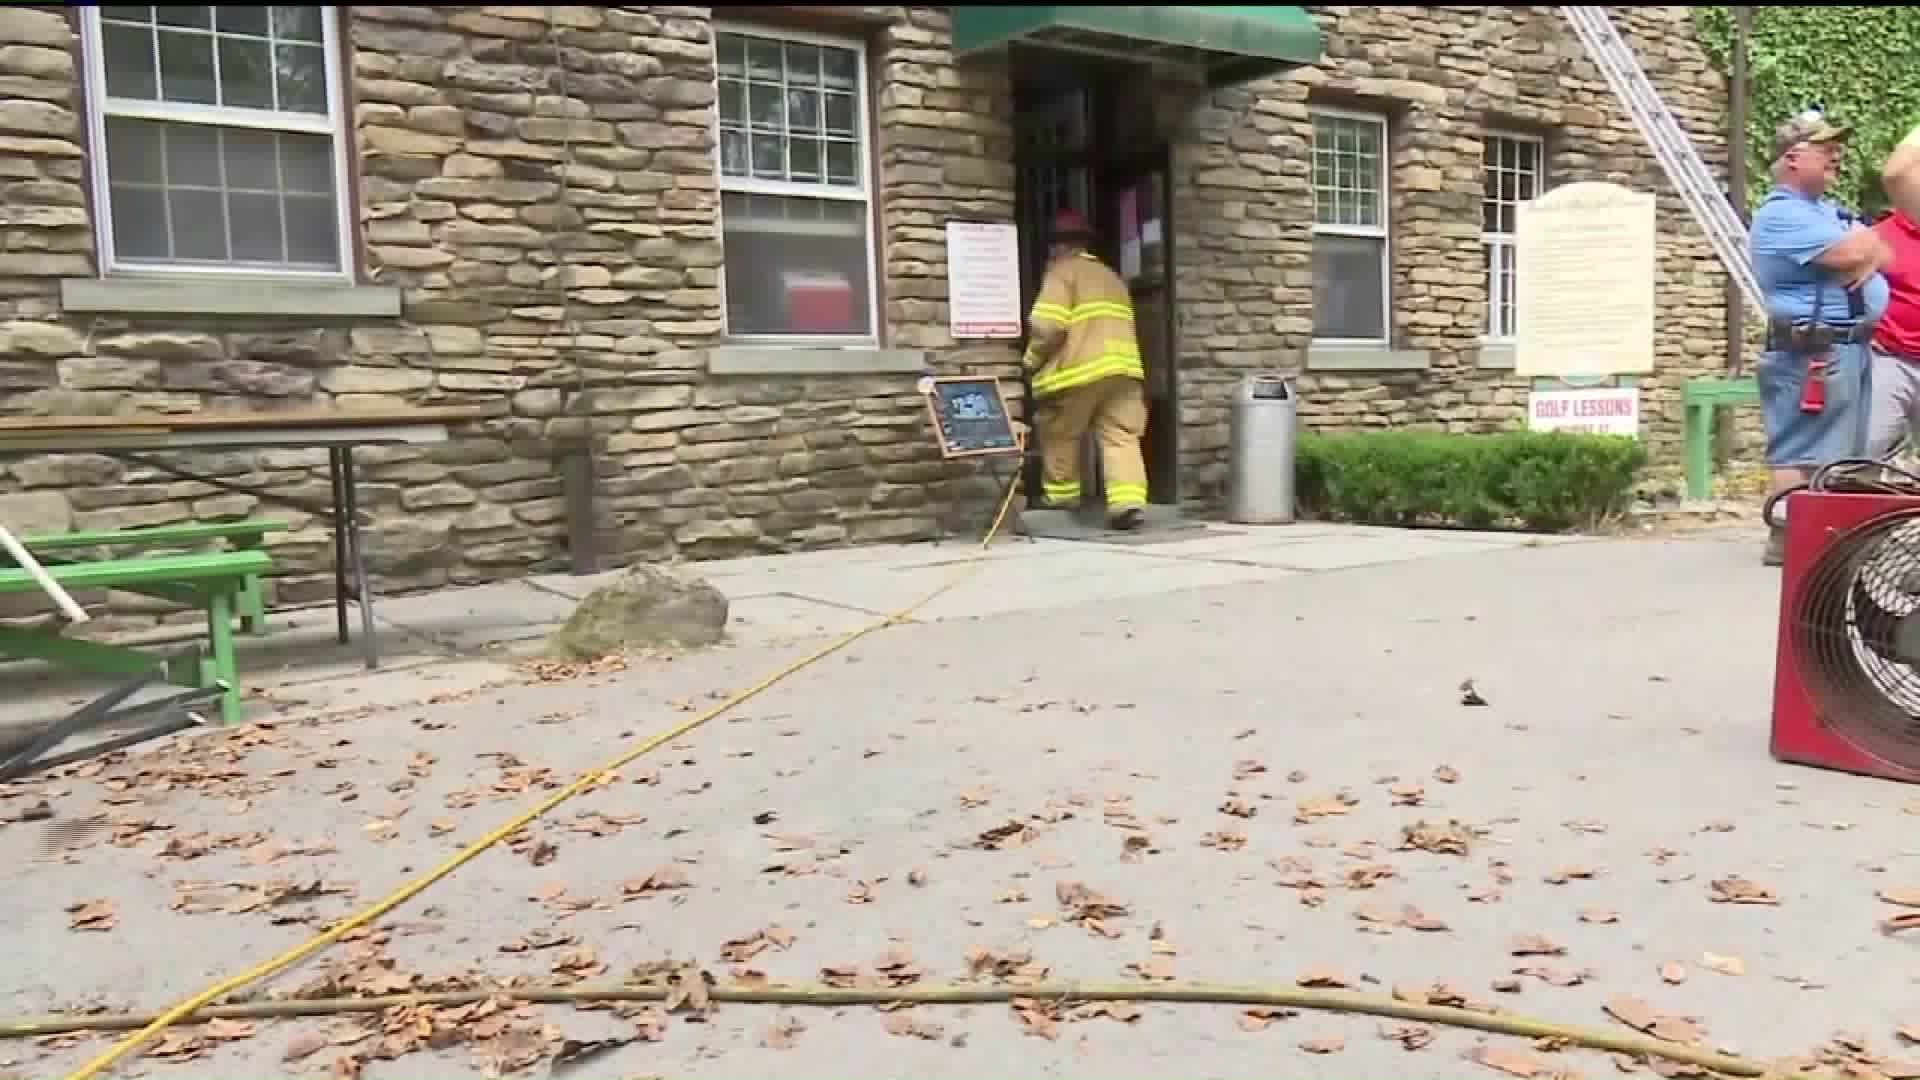 Fire at Fern Hall in Susquehanna County